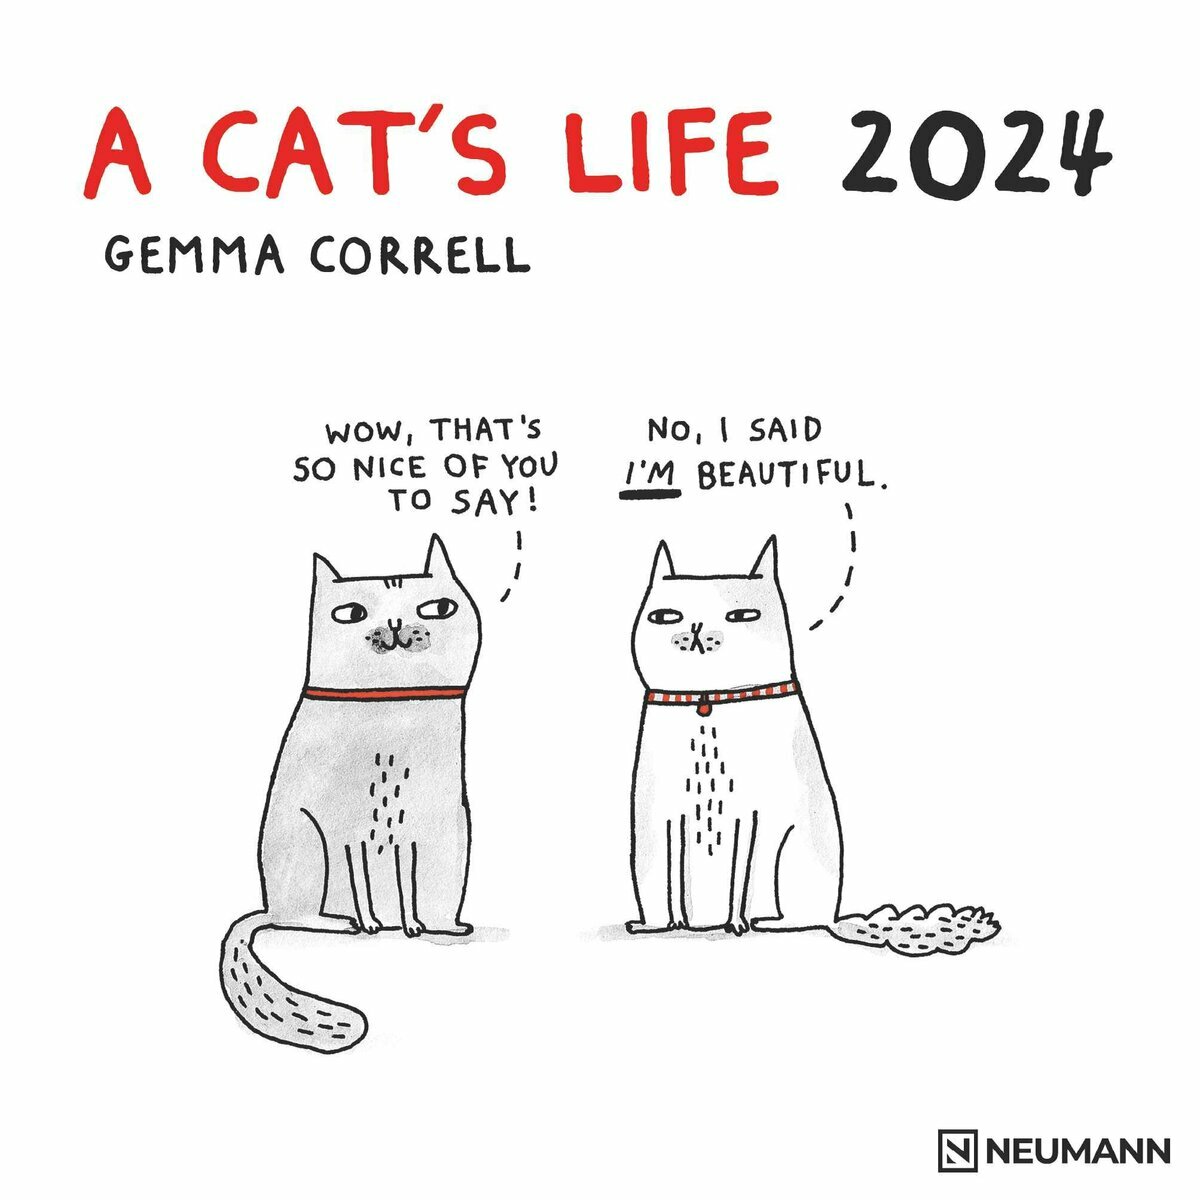 calendrier BD humour chat - a dog's life 2024